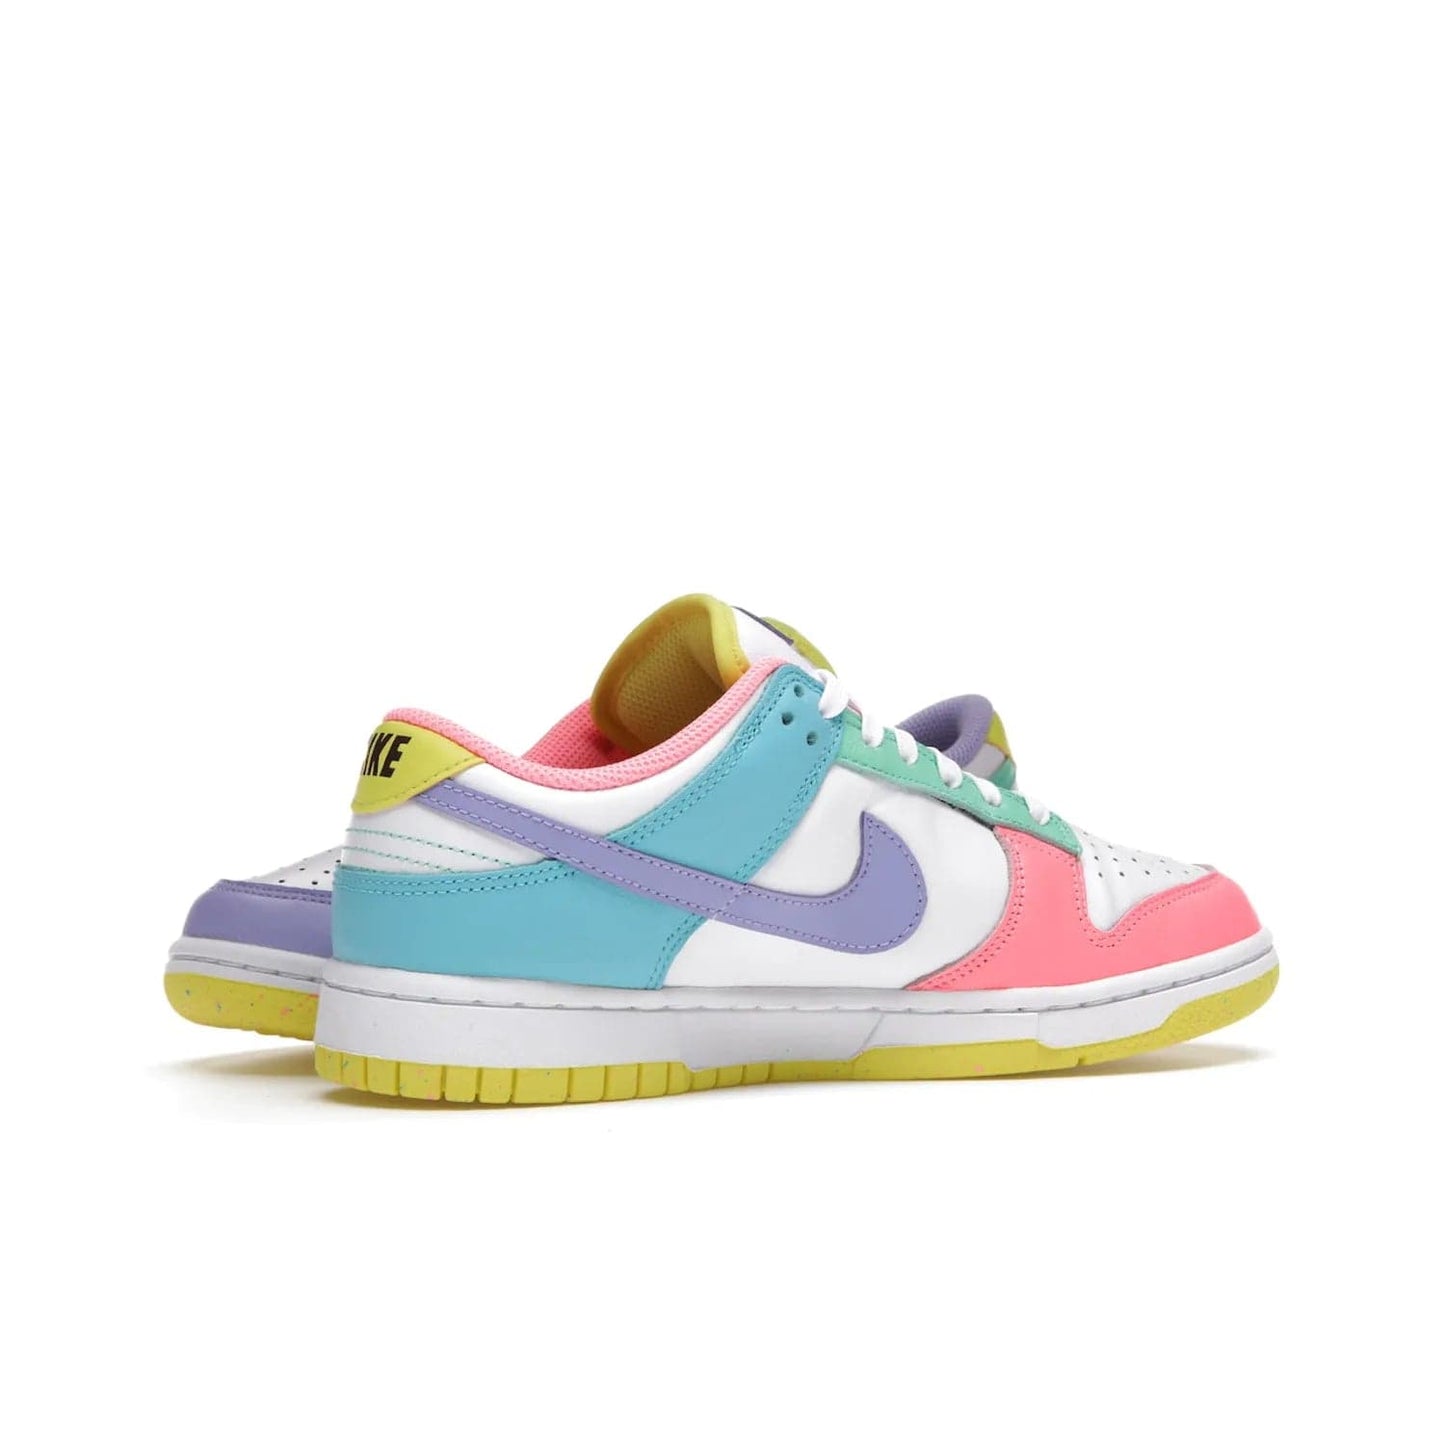 Nike Dunk Low SE Easter Candy (Women's) - Image 16 - Only at www.BallersClubKickz.com - UP
The Nike Dunk Low SE Easter Candy (Women's) brings a stylish touch to any outfit with its white leather upper, colorful accents, and multicolor speckle detailing. Shop now before they're gone.